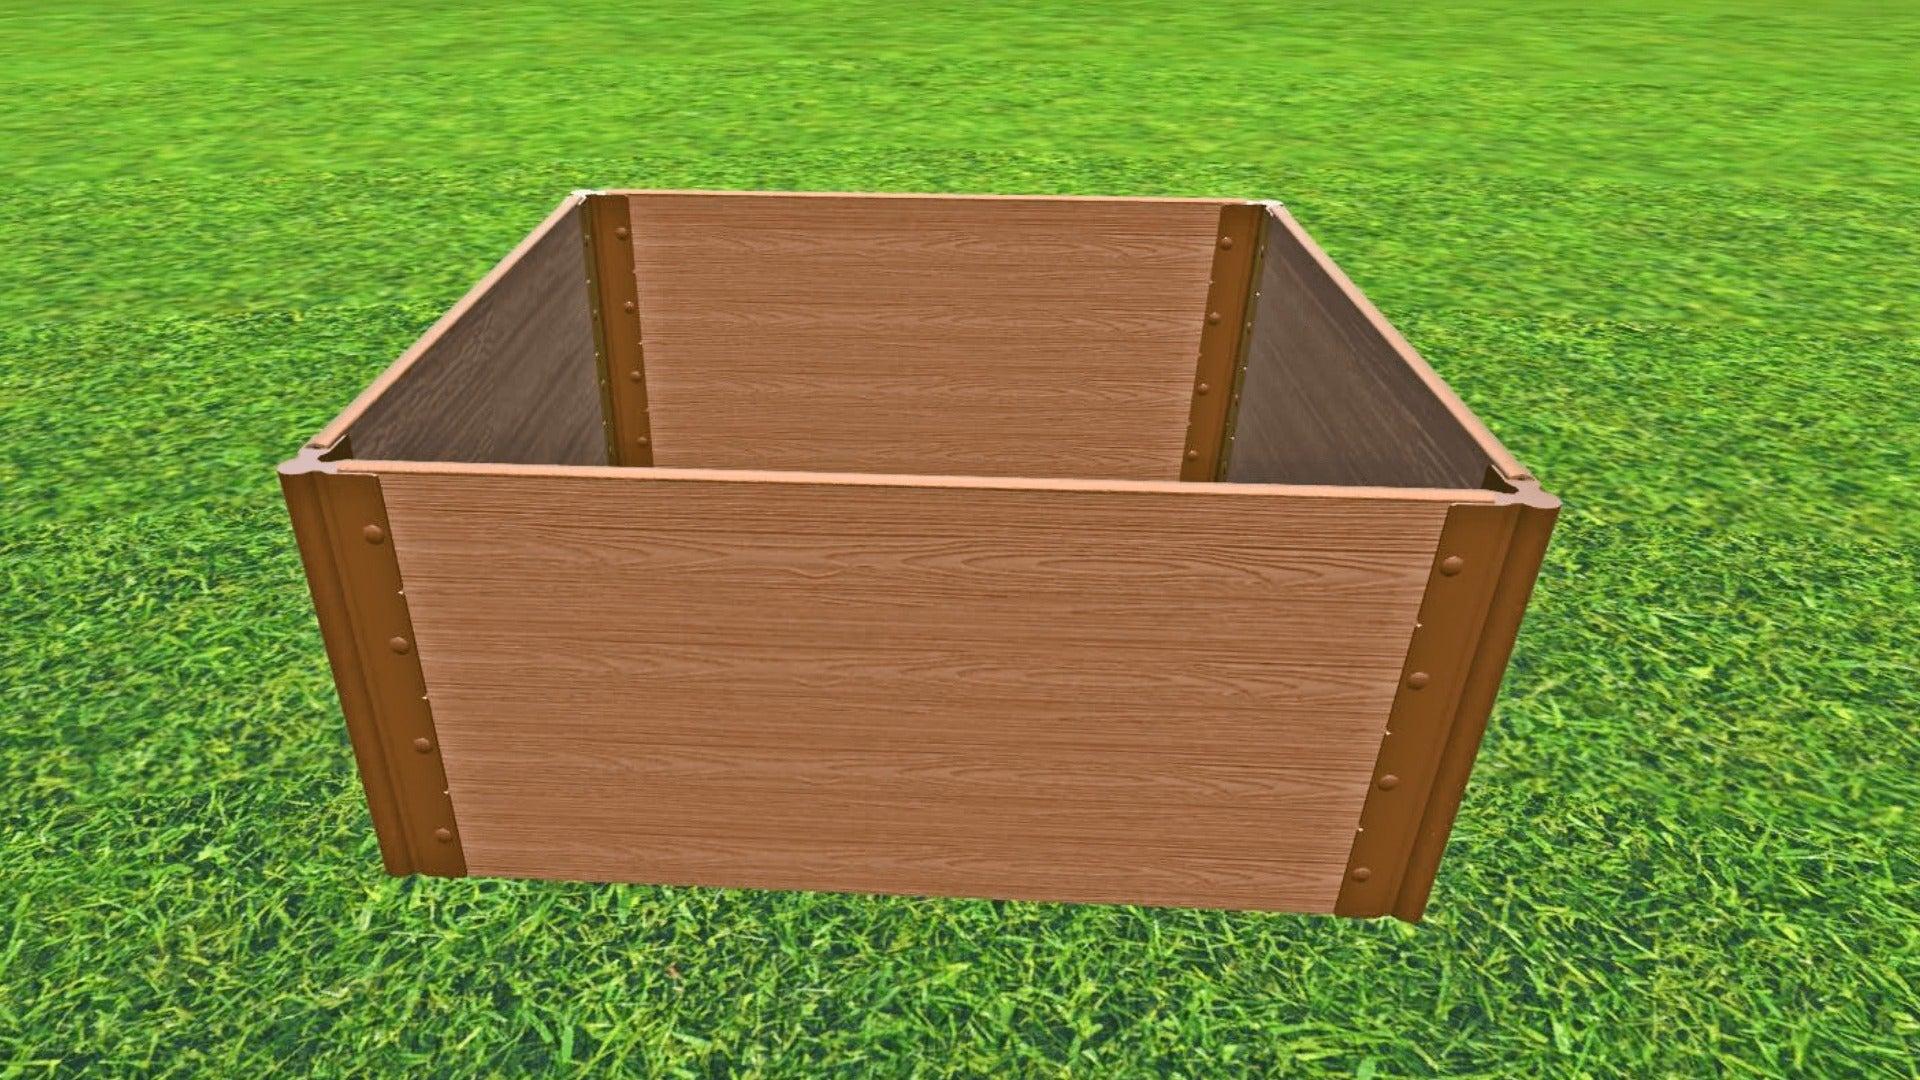 Tool-Free 4' x 4' Raised Garden Bed Raised Garden Beds Frame It All Classic Sienna 1" 4 = 22"